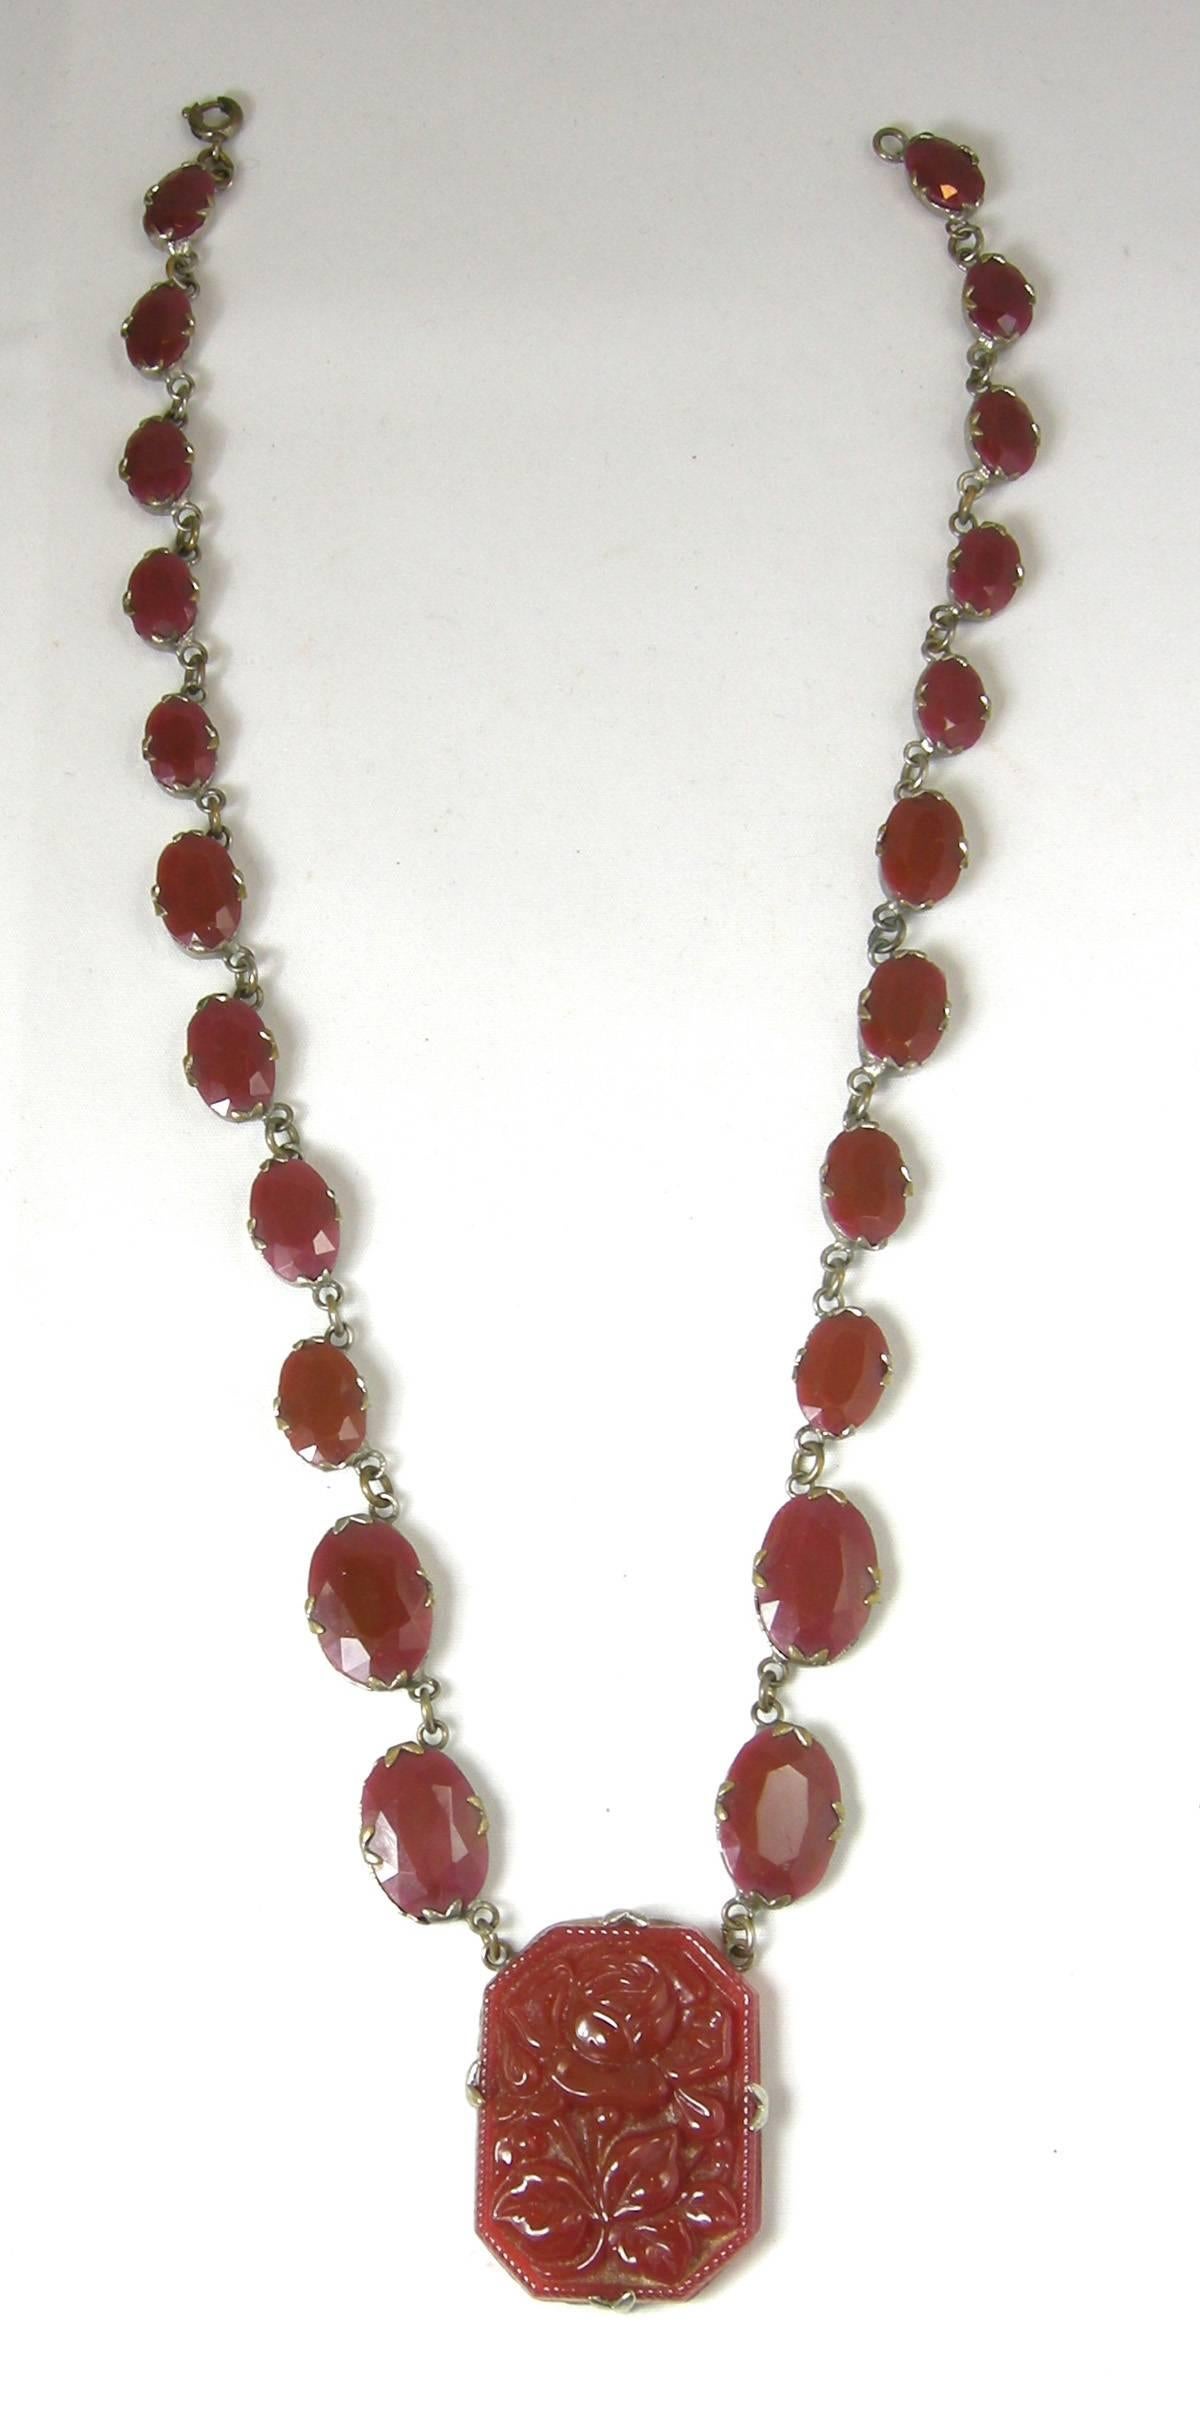 This vintage 1930s necklace features a heavily carved floral design in carnelian stone with faceted carnelians along the sterling silver chain.  This necklace measures 17” x 1/2” and the centerpiece is 1-1/4” x 1” and has a spring closure. This